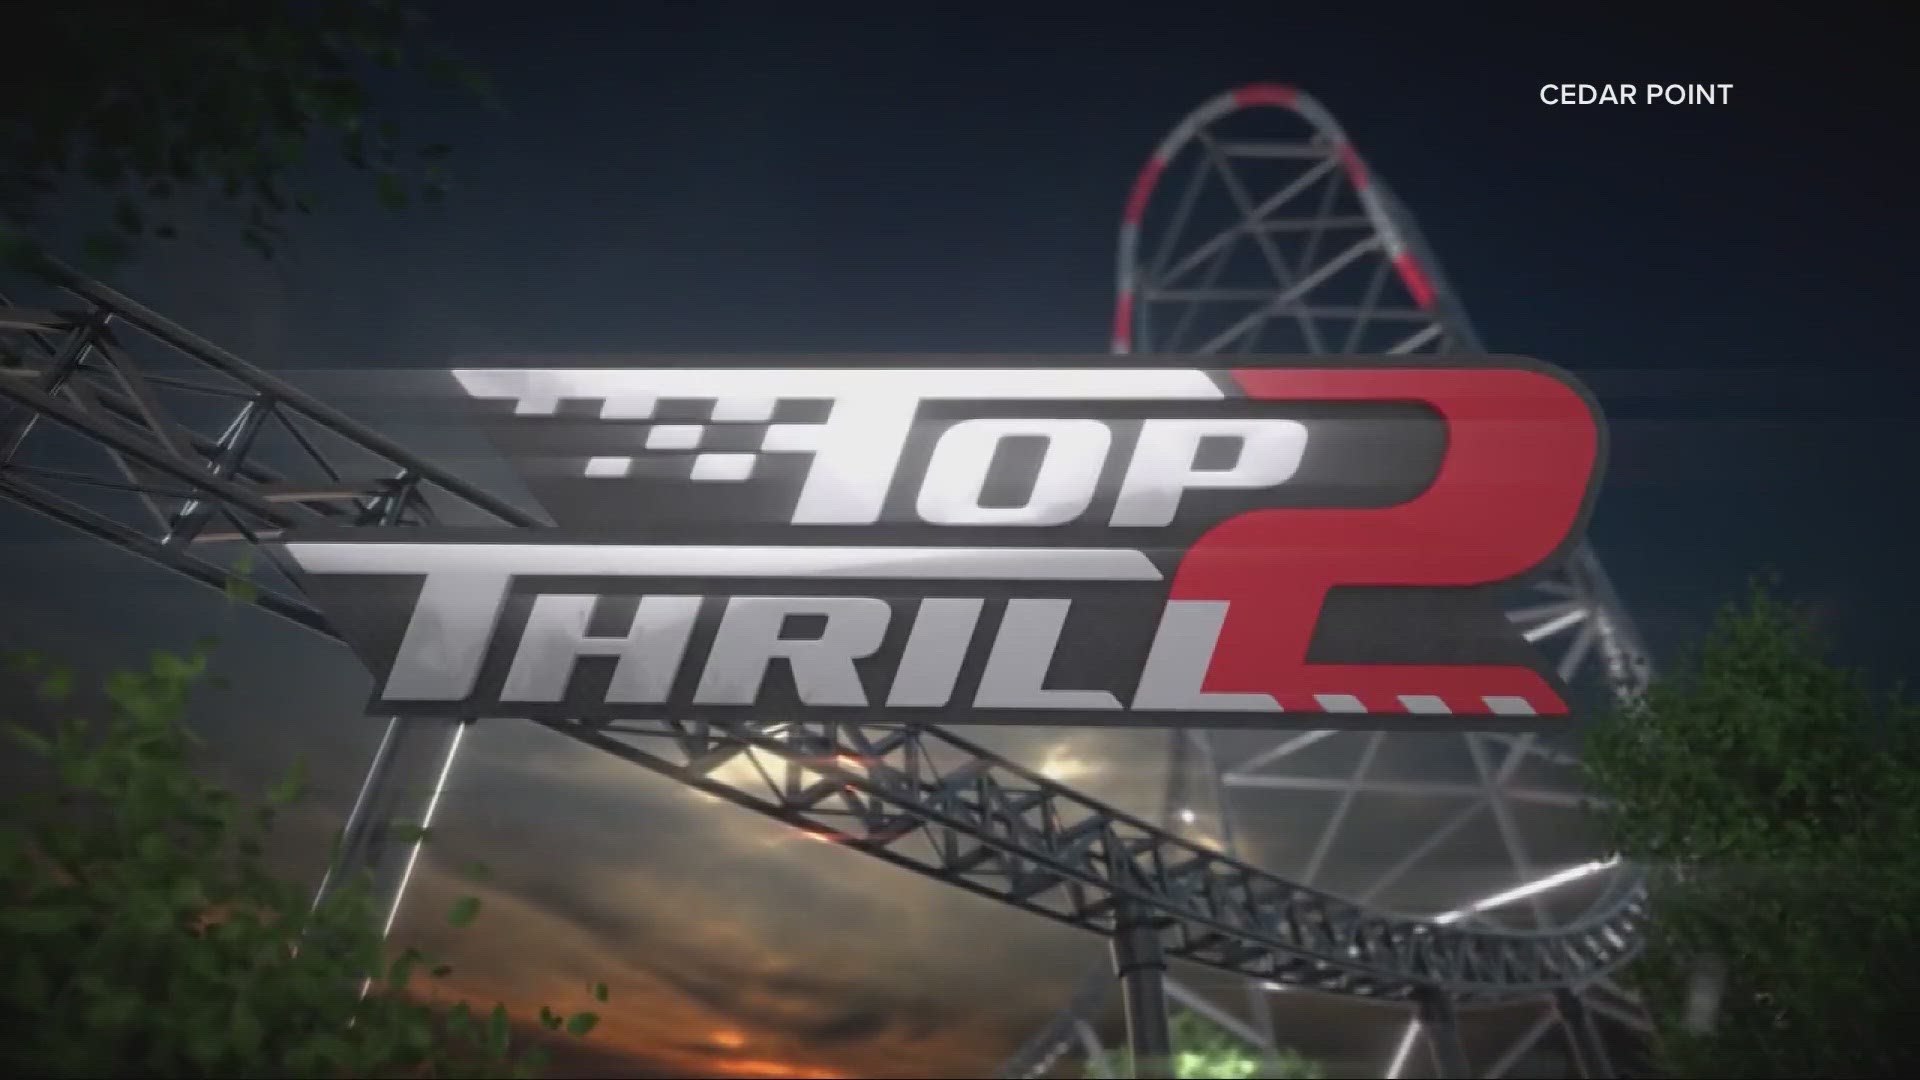 What can you expect from the new Top Thrill 2 roller coaster at Cedar Point in 2024? 3News' Austin Love talks with Zamperla about the enhanced ride experience.